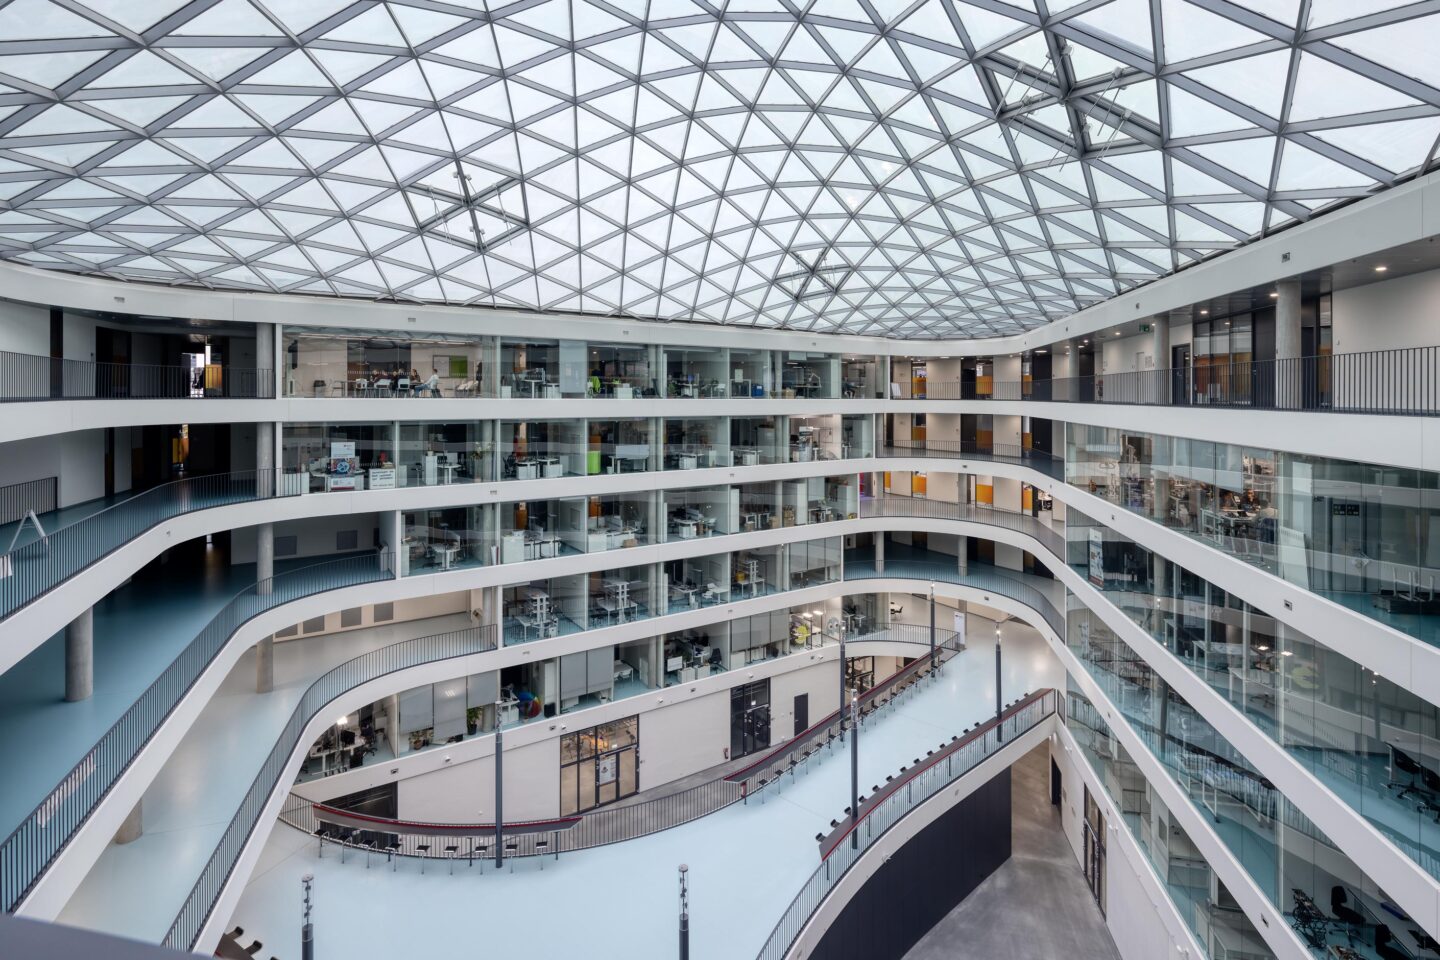 DHBW Stuttgart, Faculty of Engineering | inside the atrium with glass roof